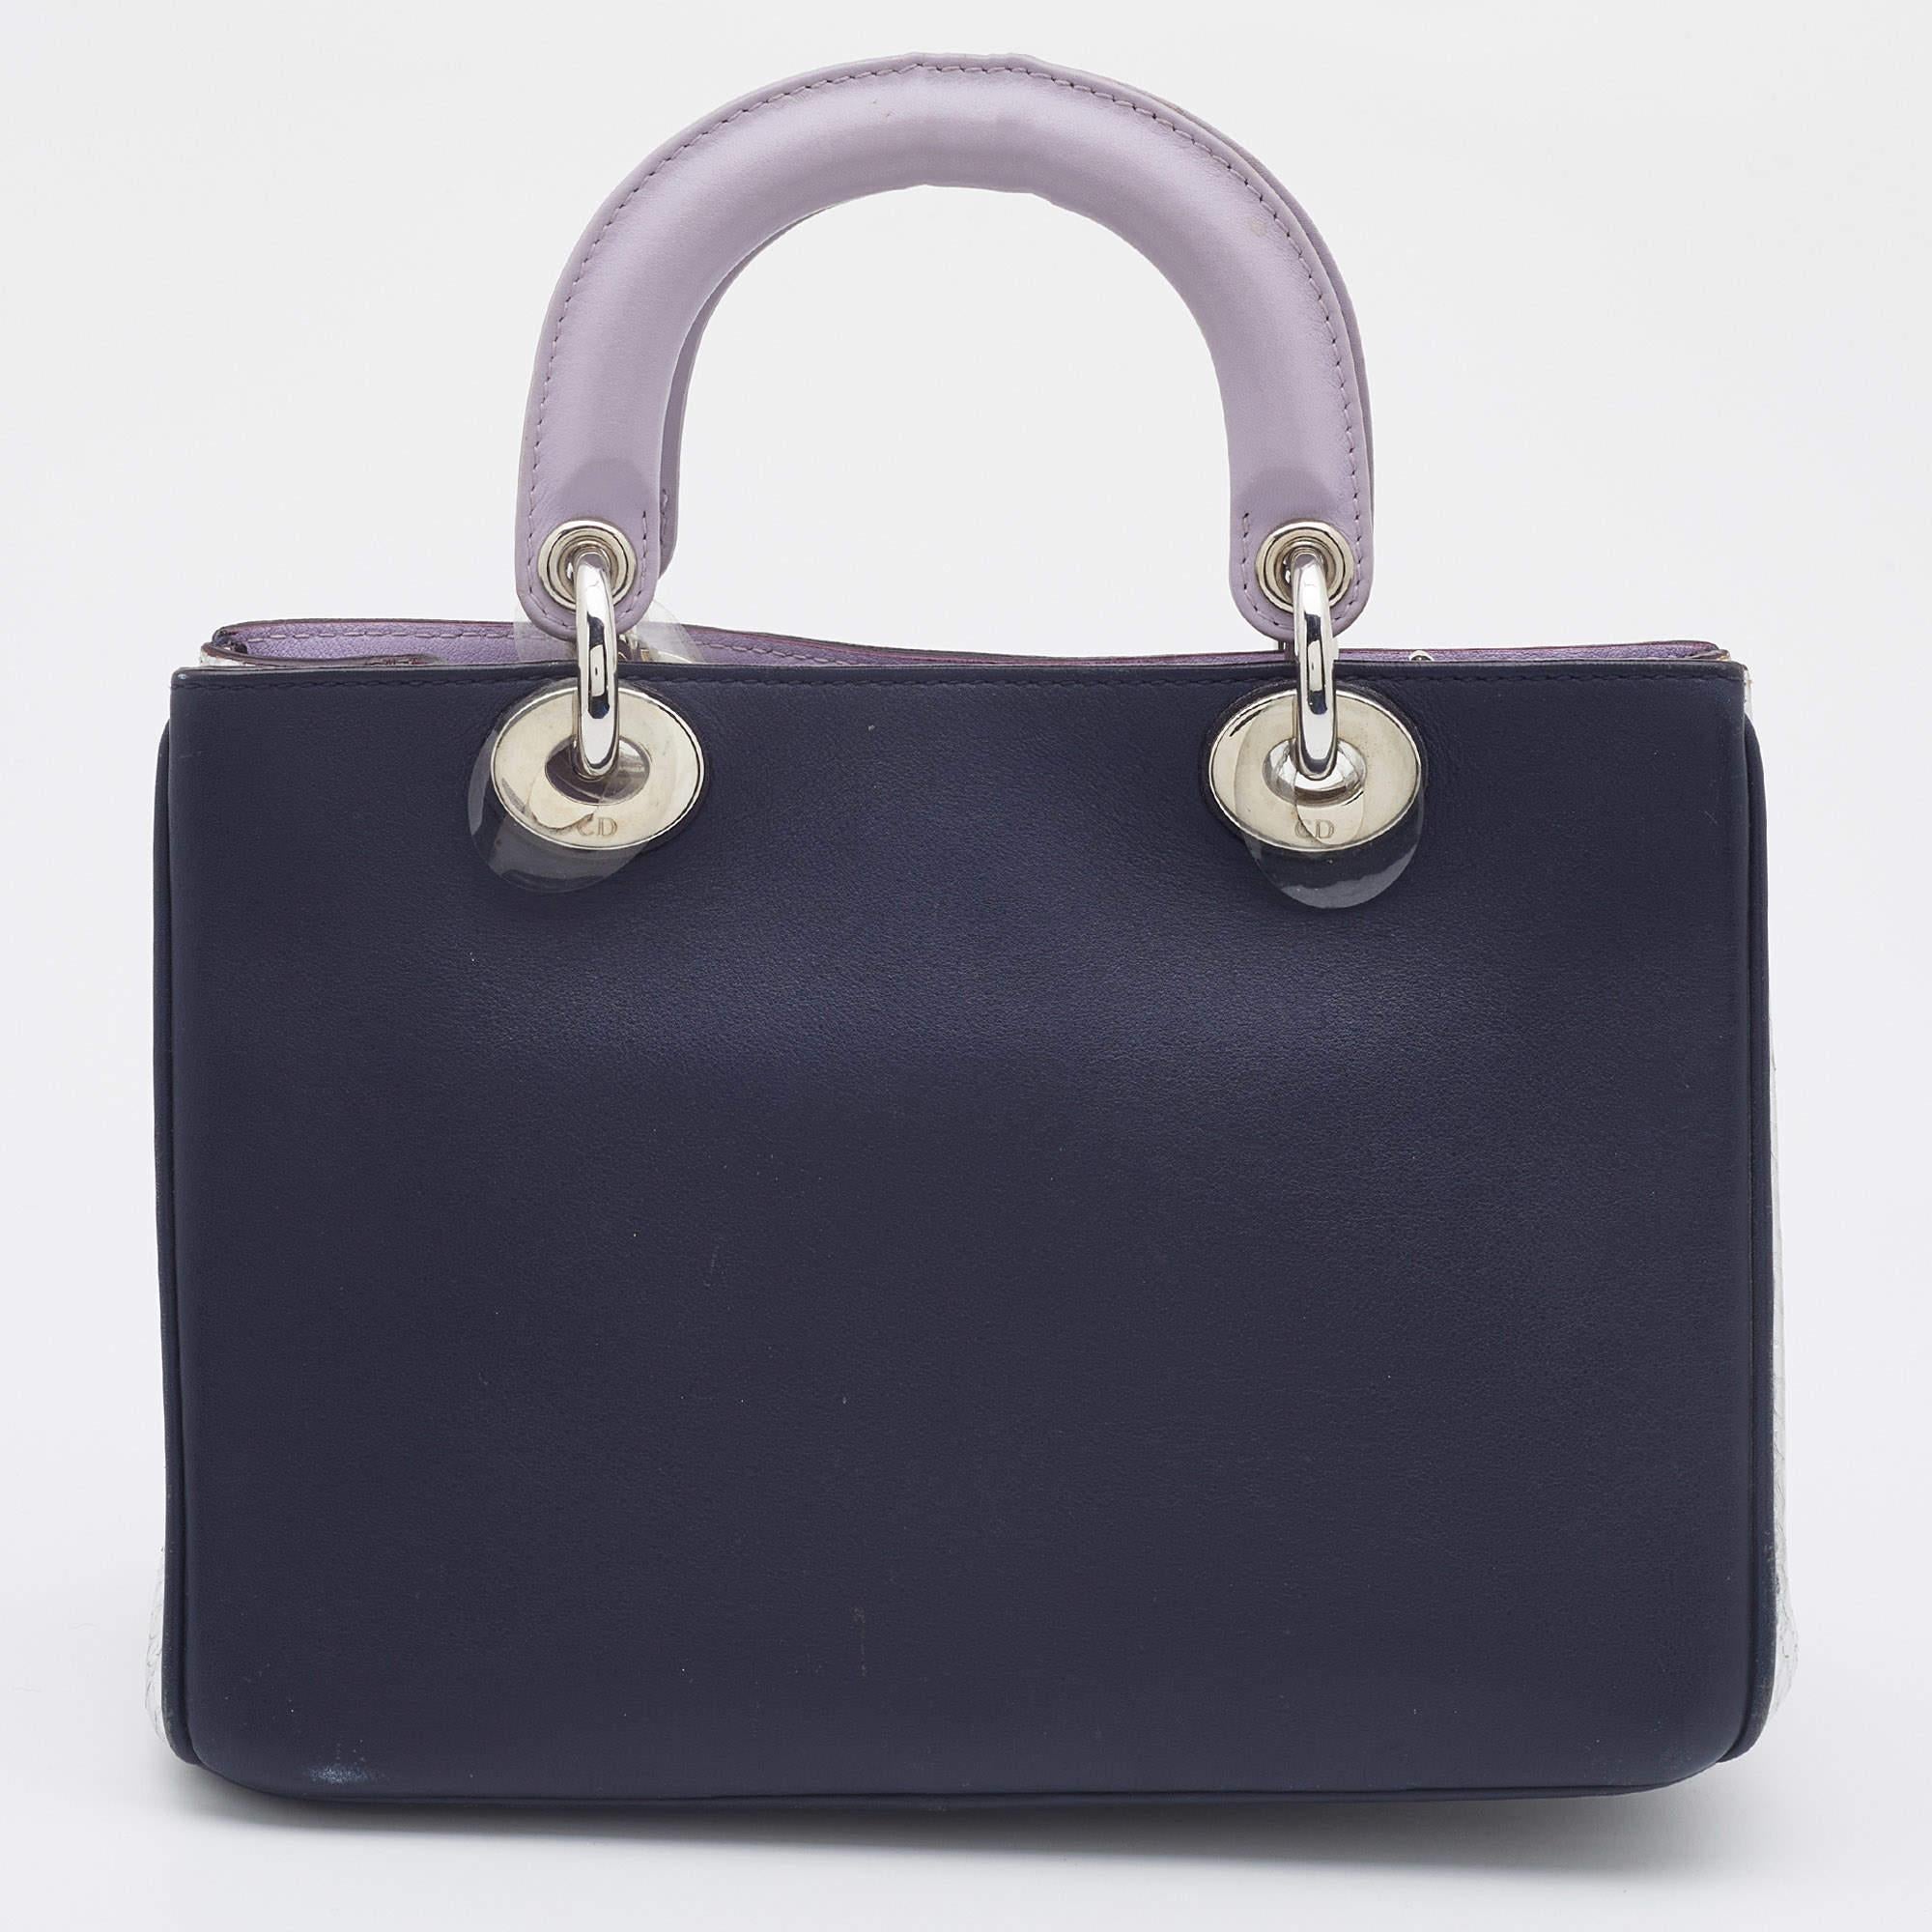 The Diorissimo perfectly captures the refined craftsmanship and the brand's vision of timeless elegance. The perfectly sized interior makes this Dior tote a highly functional accessory. Created from tri-color leather, it is complemented with dual